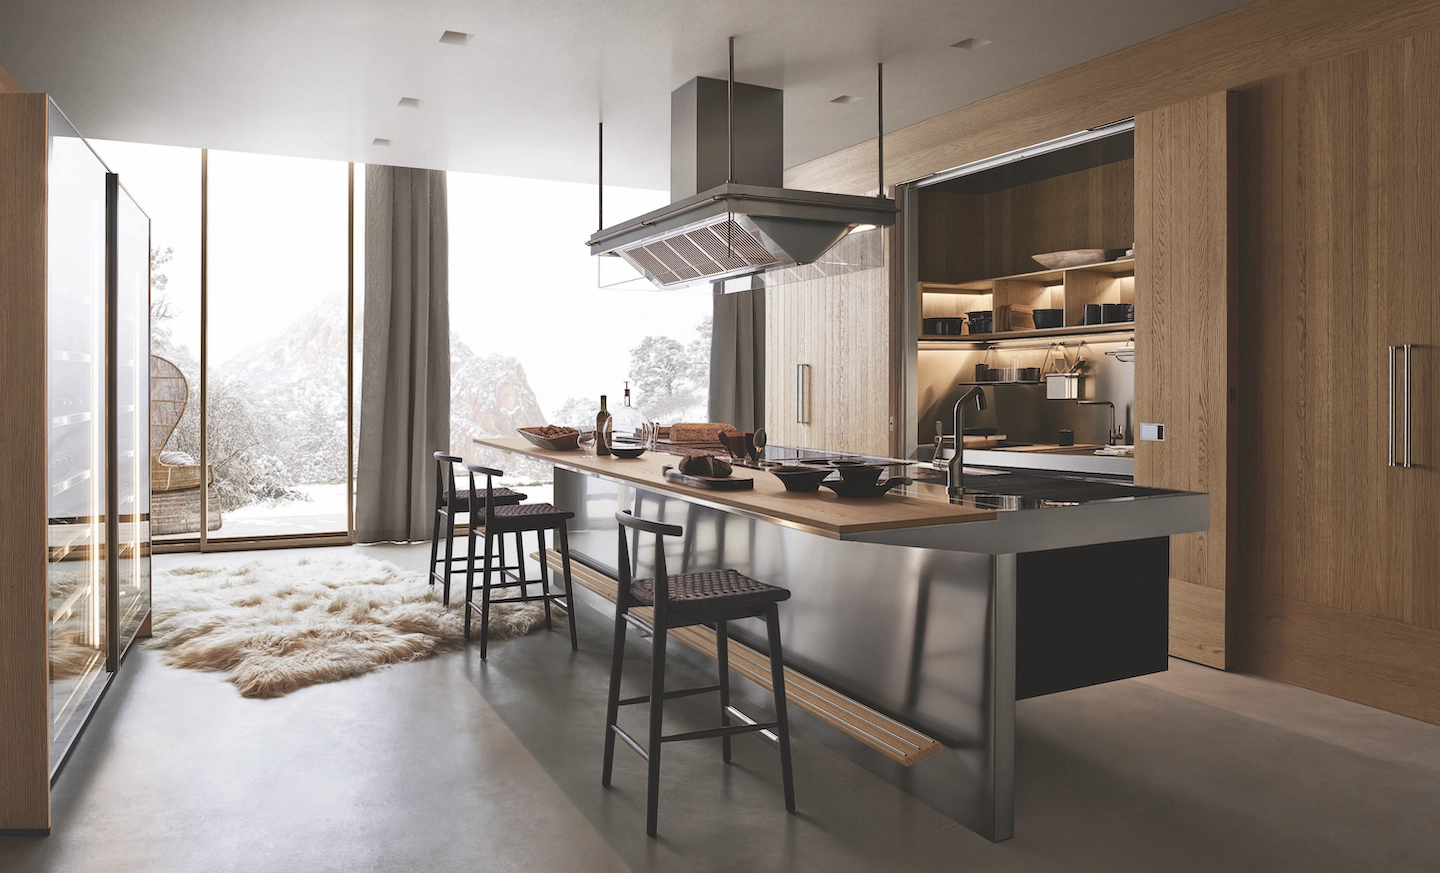 Image of an Arclinea kitchen with sliding wooden columns. The island is steel with wooden snack bars and brown stools